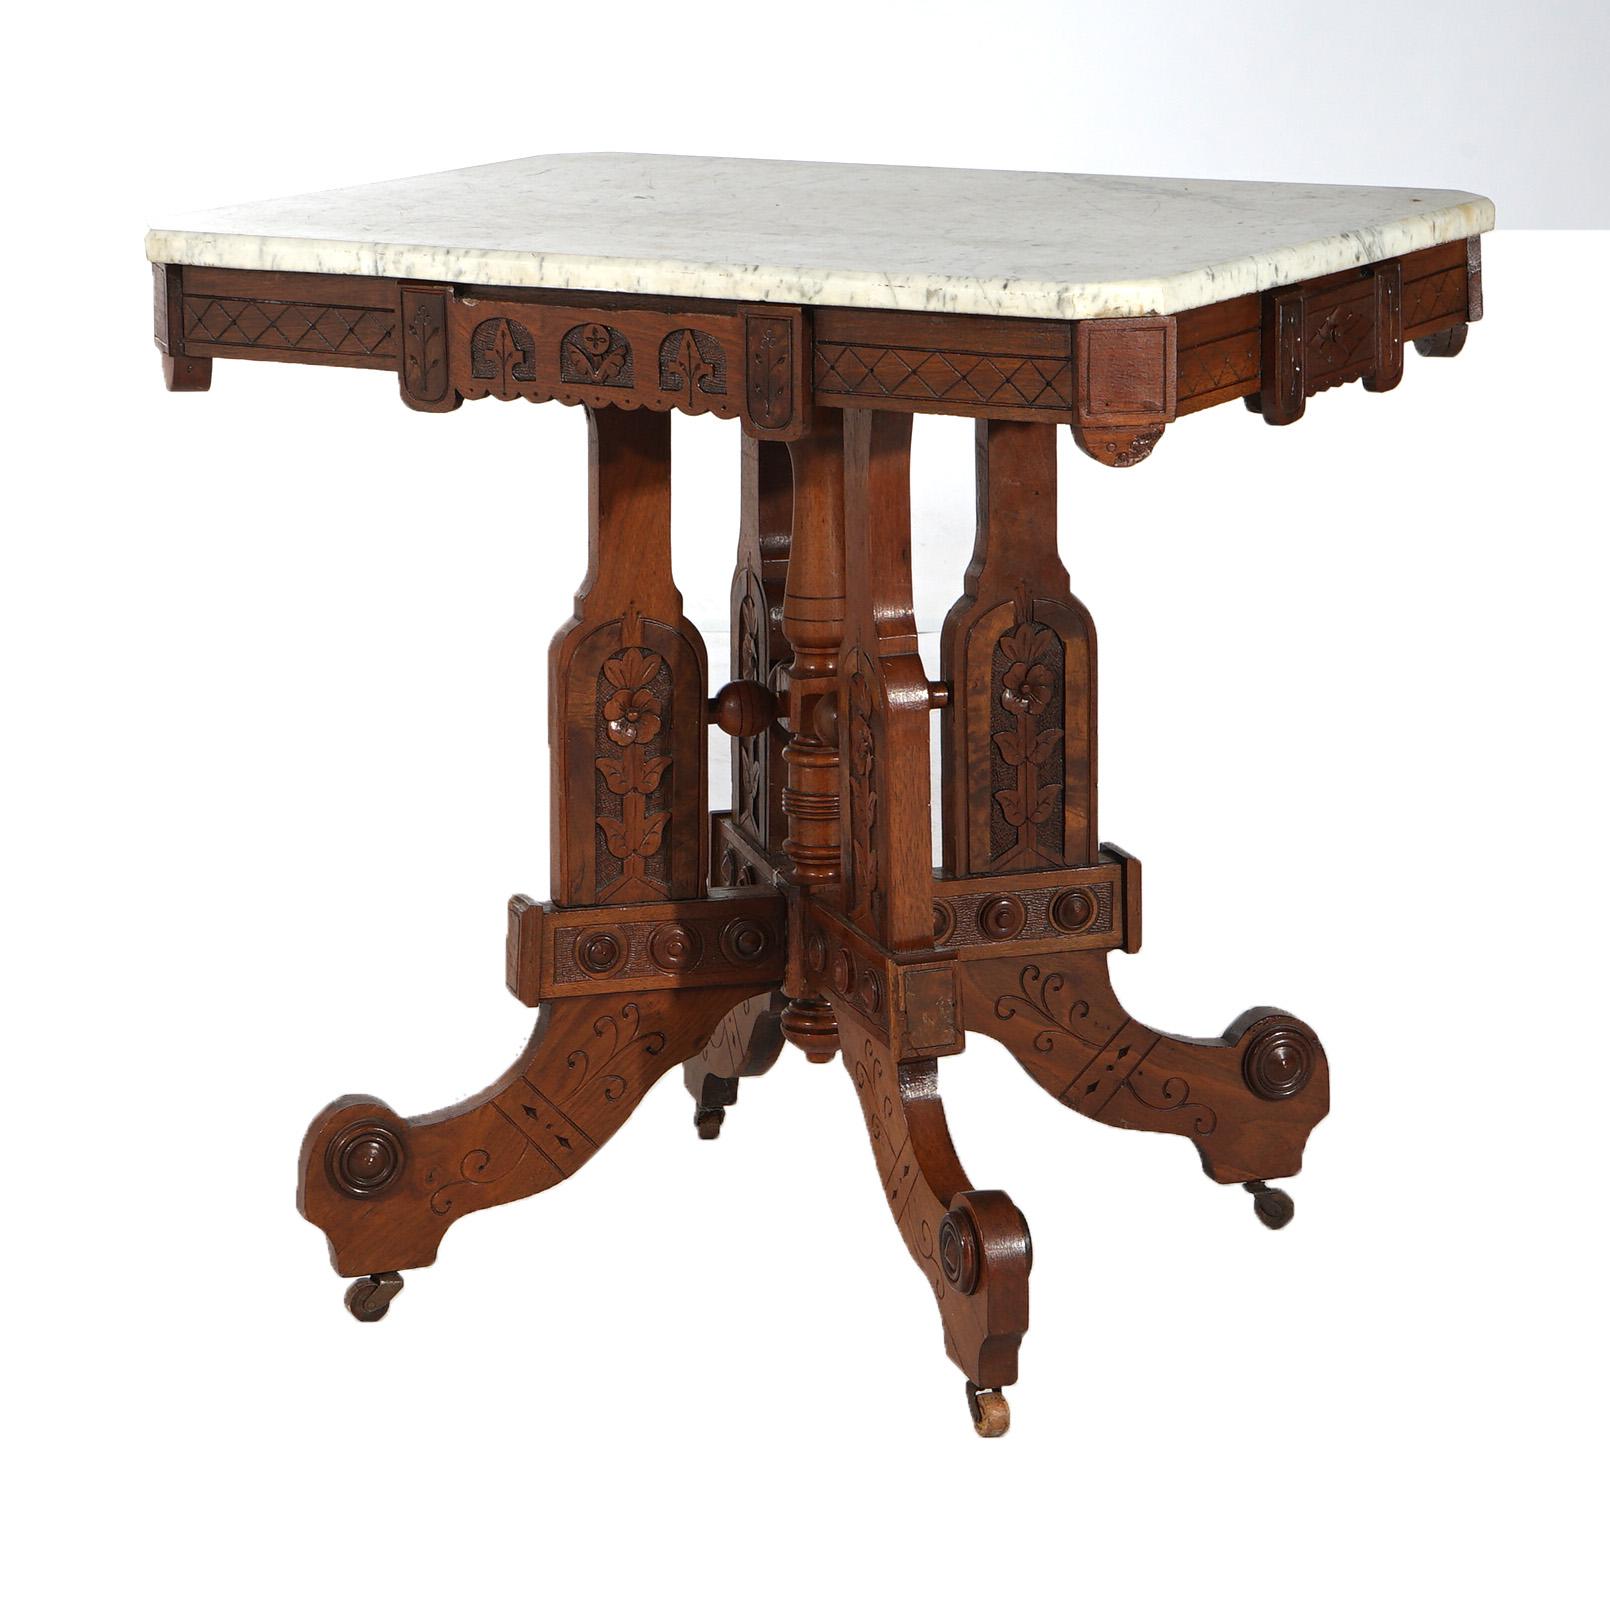 Antique Eastlake Aesthetic Floral Carved Walnut & Marble Parlor Table, c1880 For Sale 6